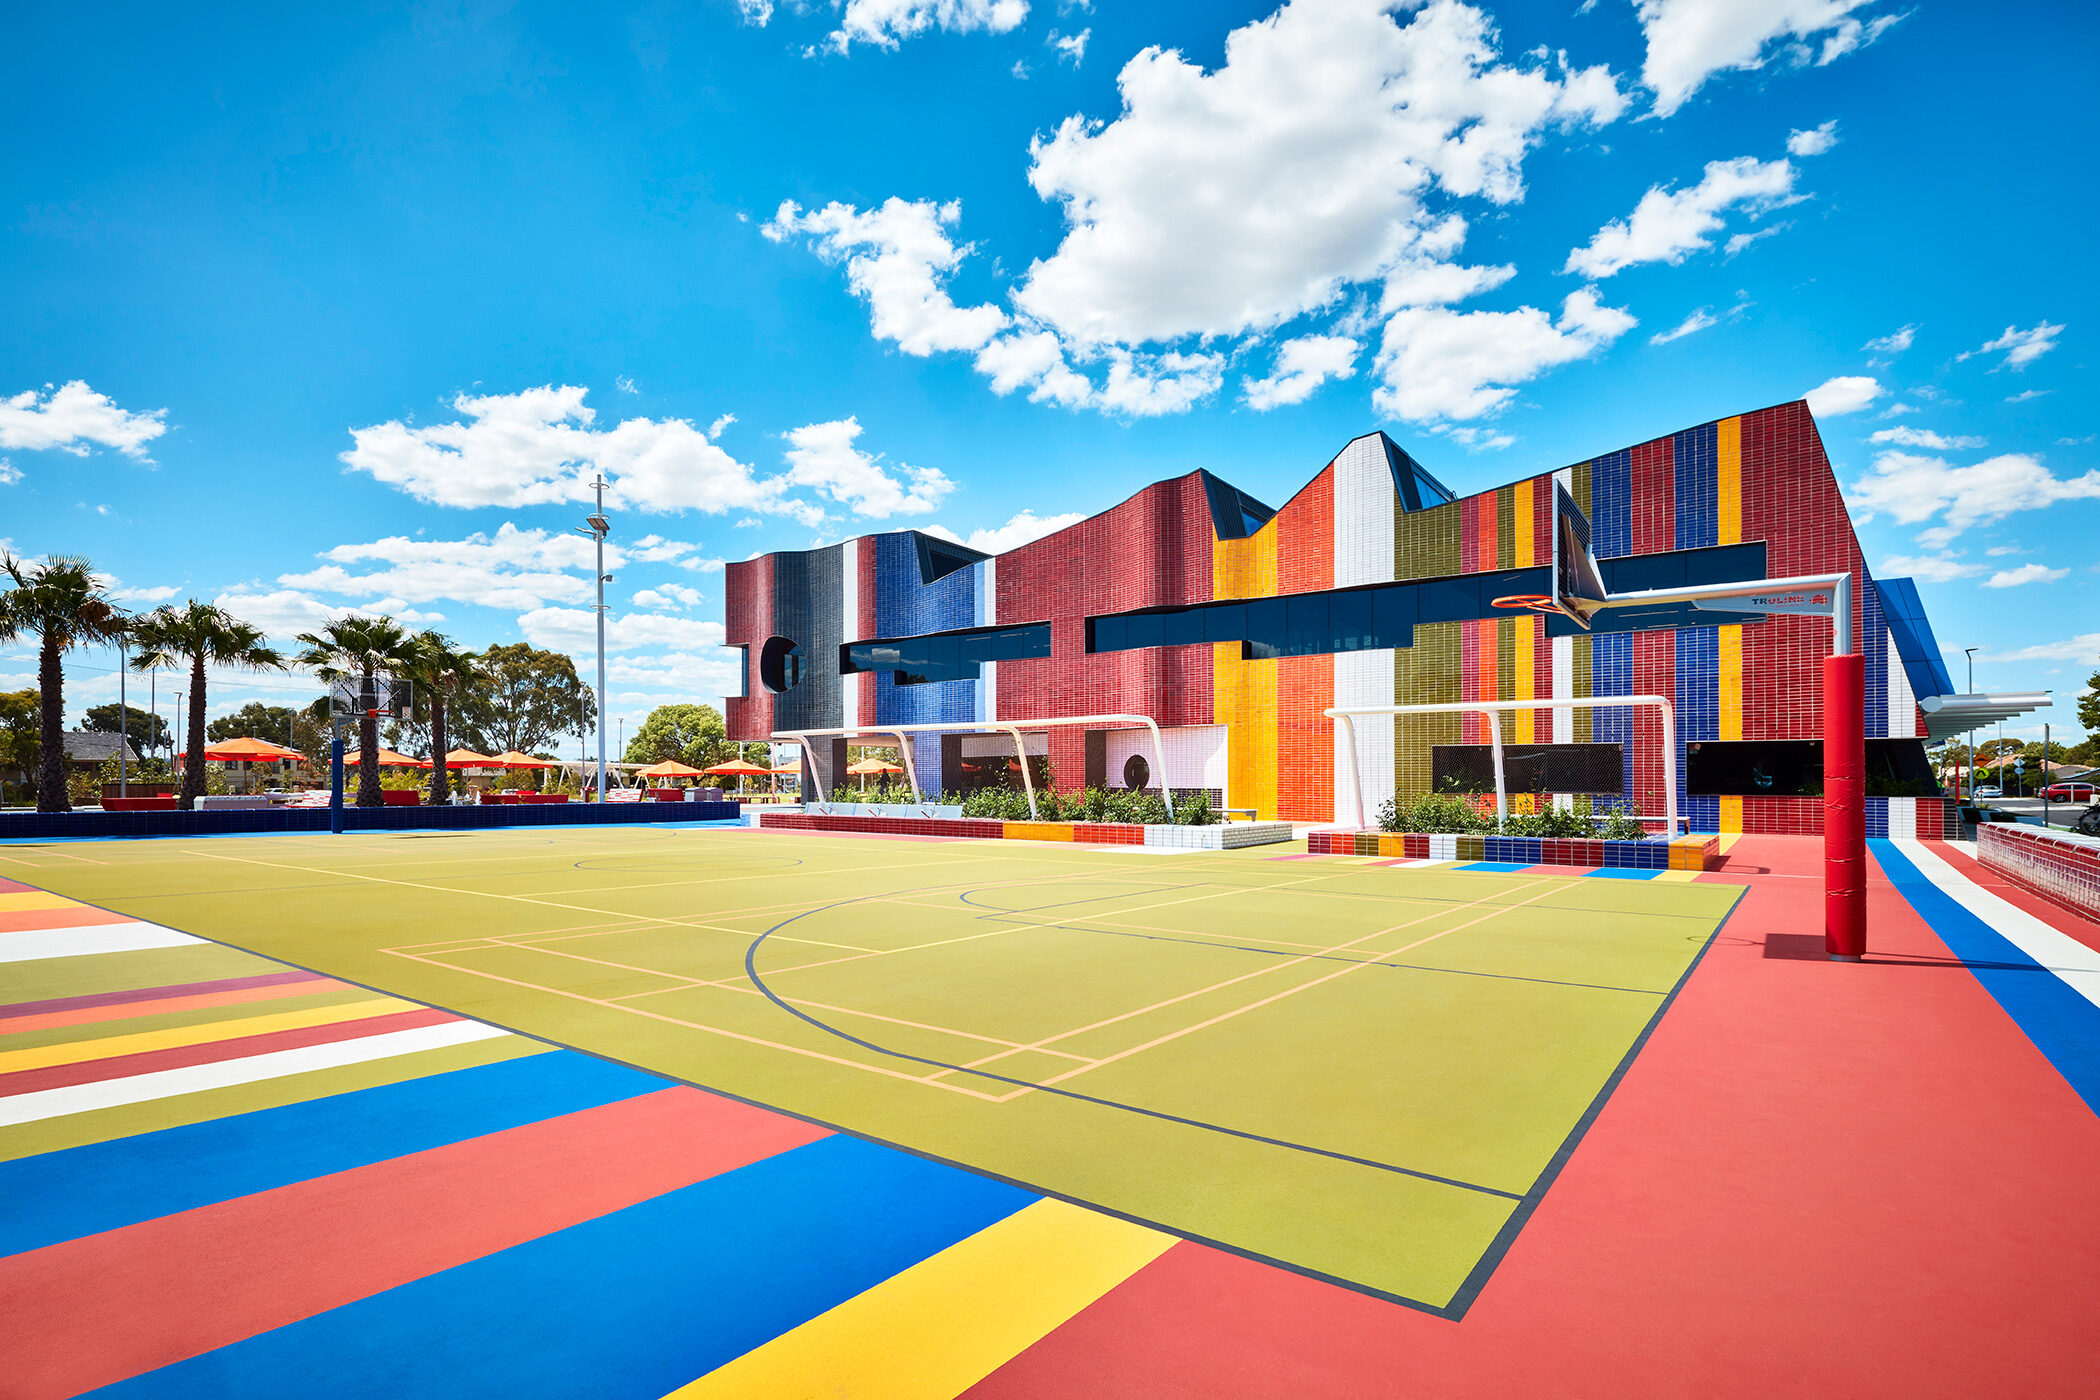 Springvale Library and Community Hubmulti coloured basketball court with tiled building - structure photographer example / concept